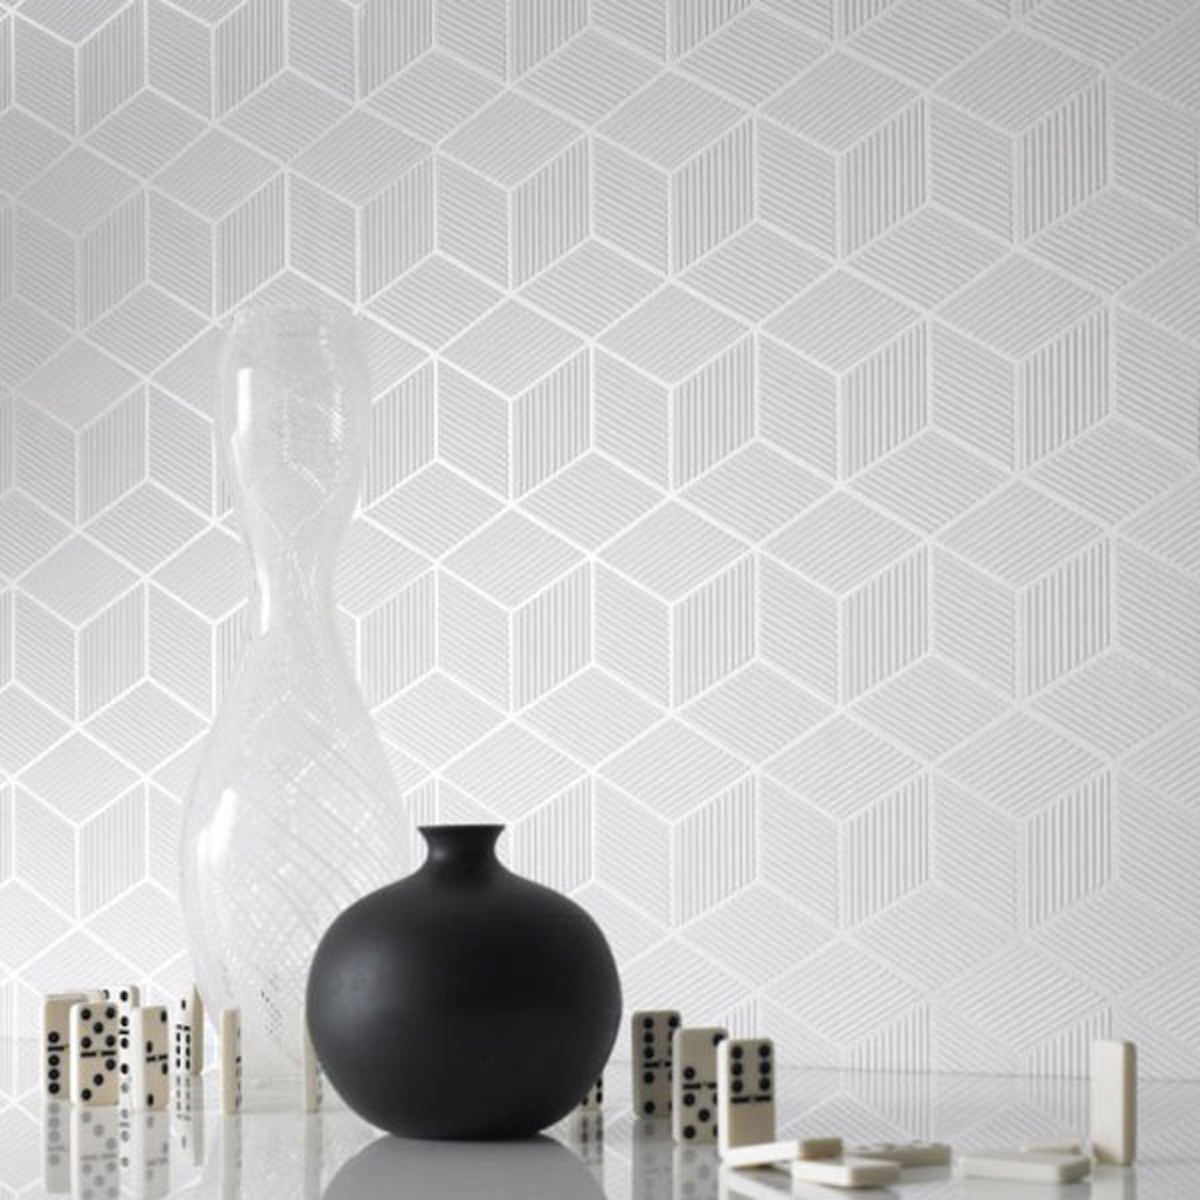  Exclusive Inspiring Black and White Wallpaper Designs with 3D Layouts